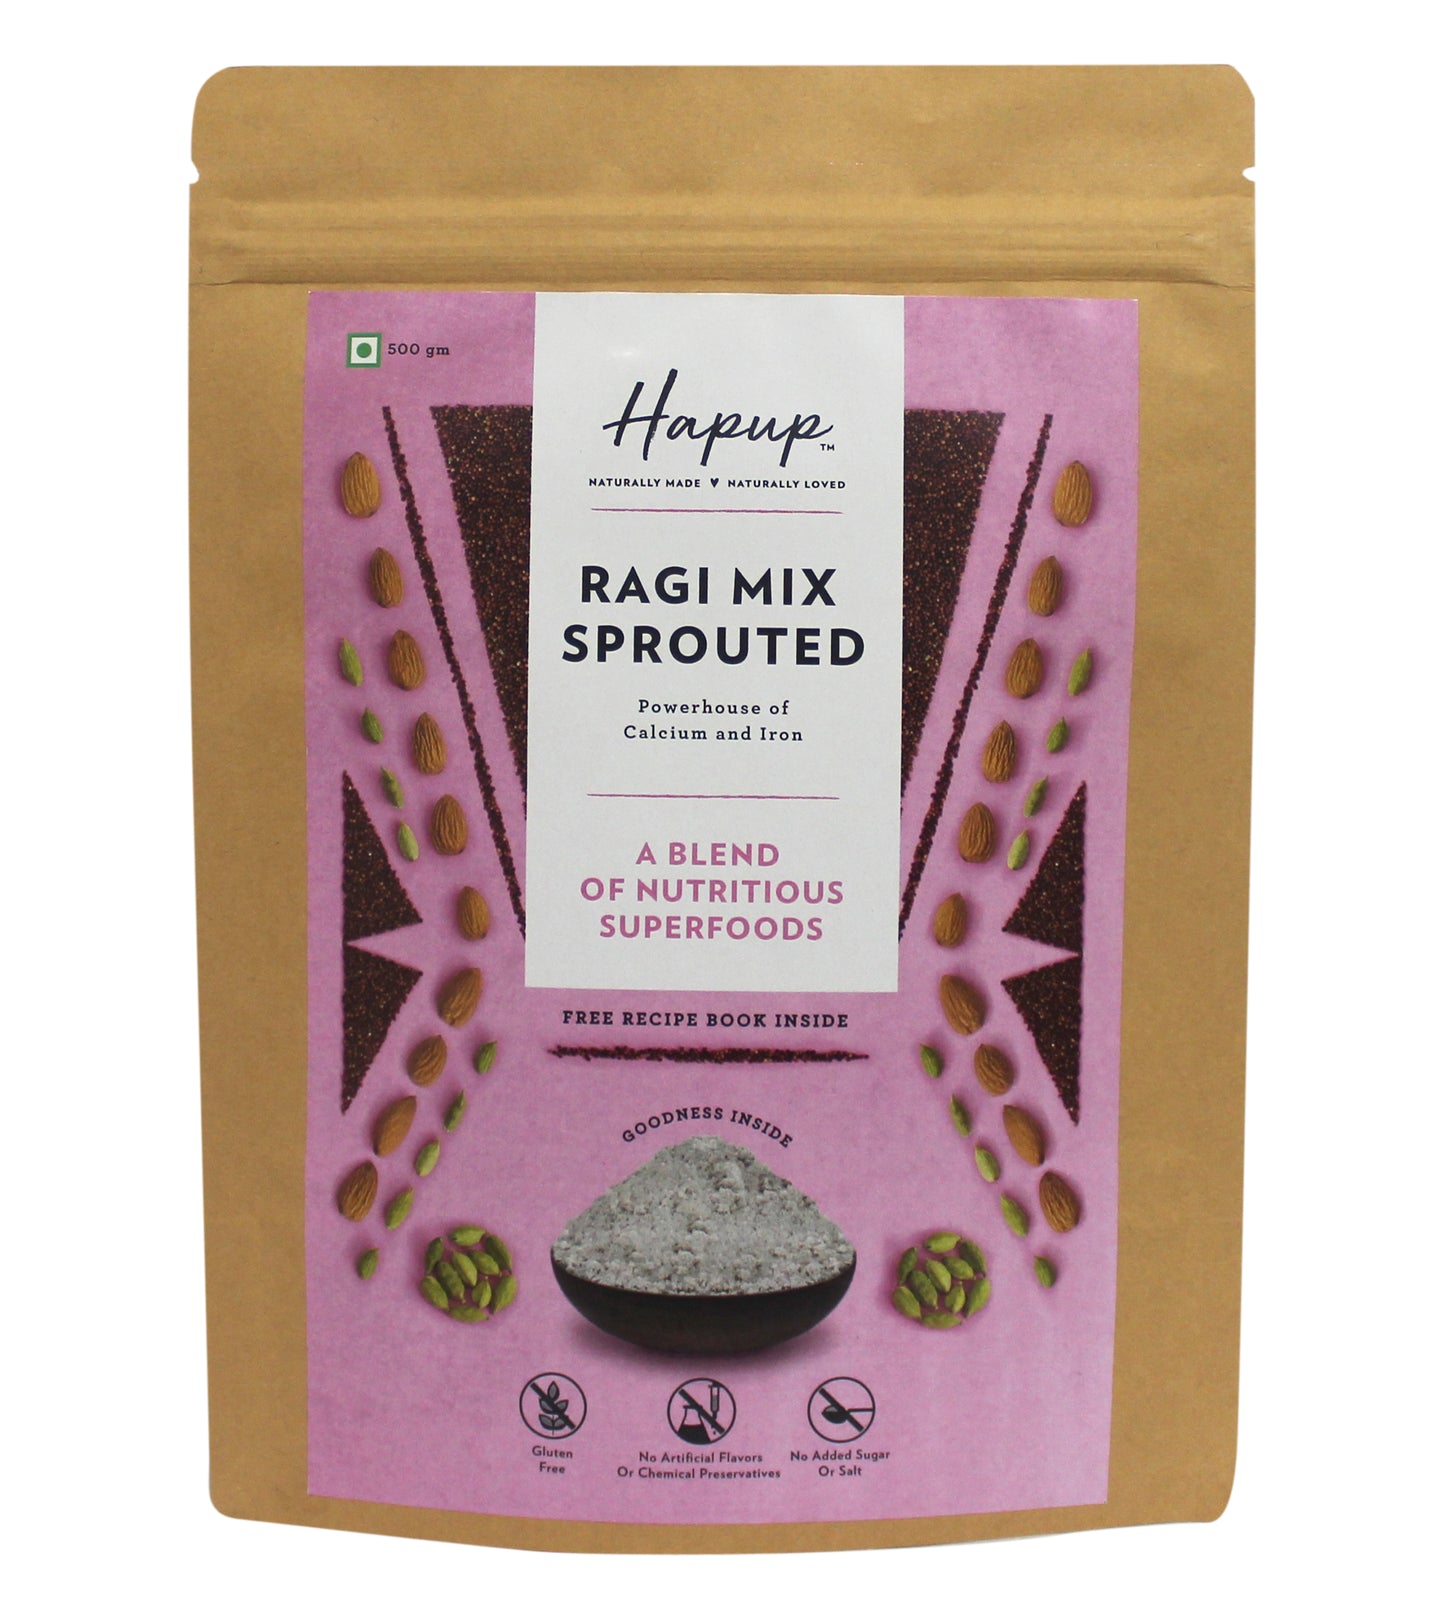 Ragi Mix Sprouted-3 Months Subscription-Save 15%- 500gm x 3